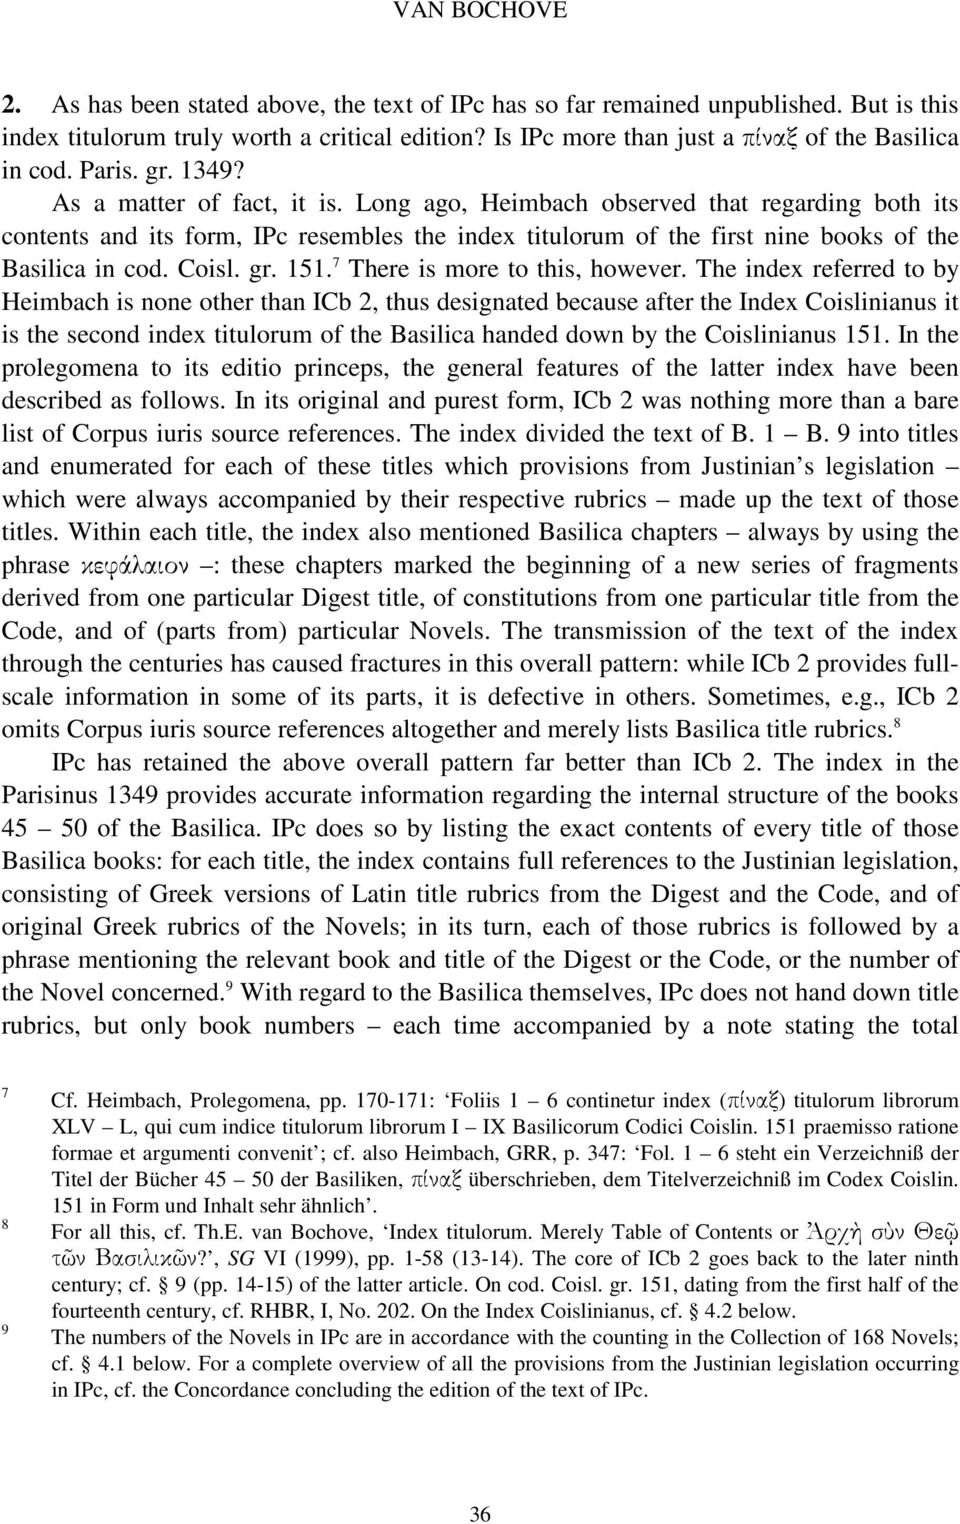 Long ago, Heimbach observed that regarding both its contents and its form, IPc resembles the index titulorum of the first nine books of the Basilica in cod. Coisl. gr. 151.